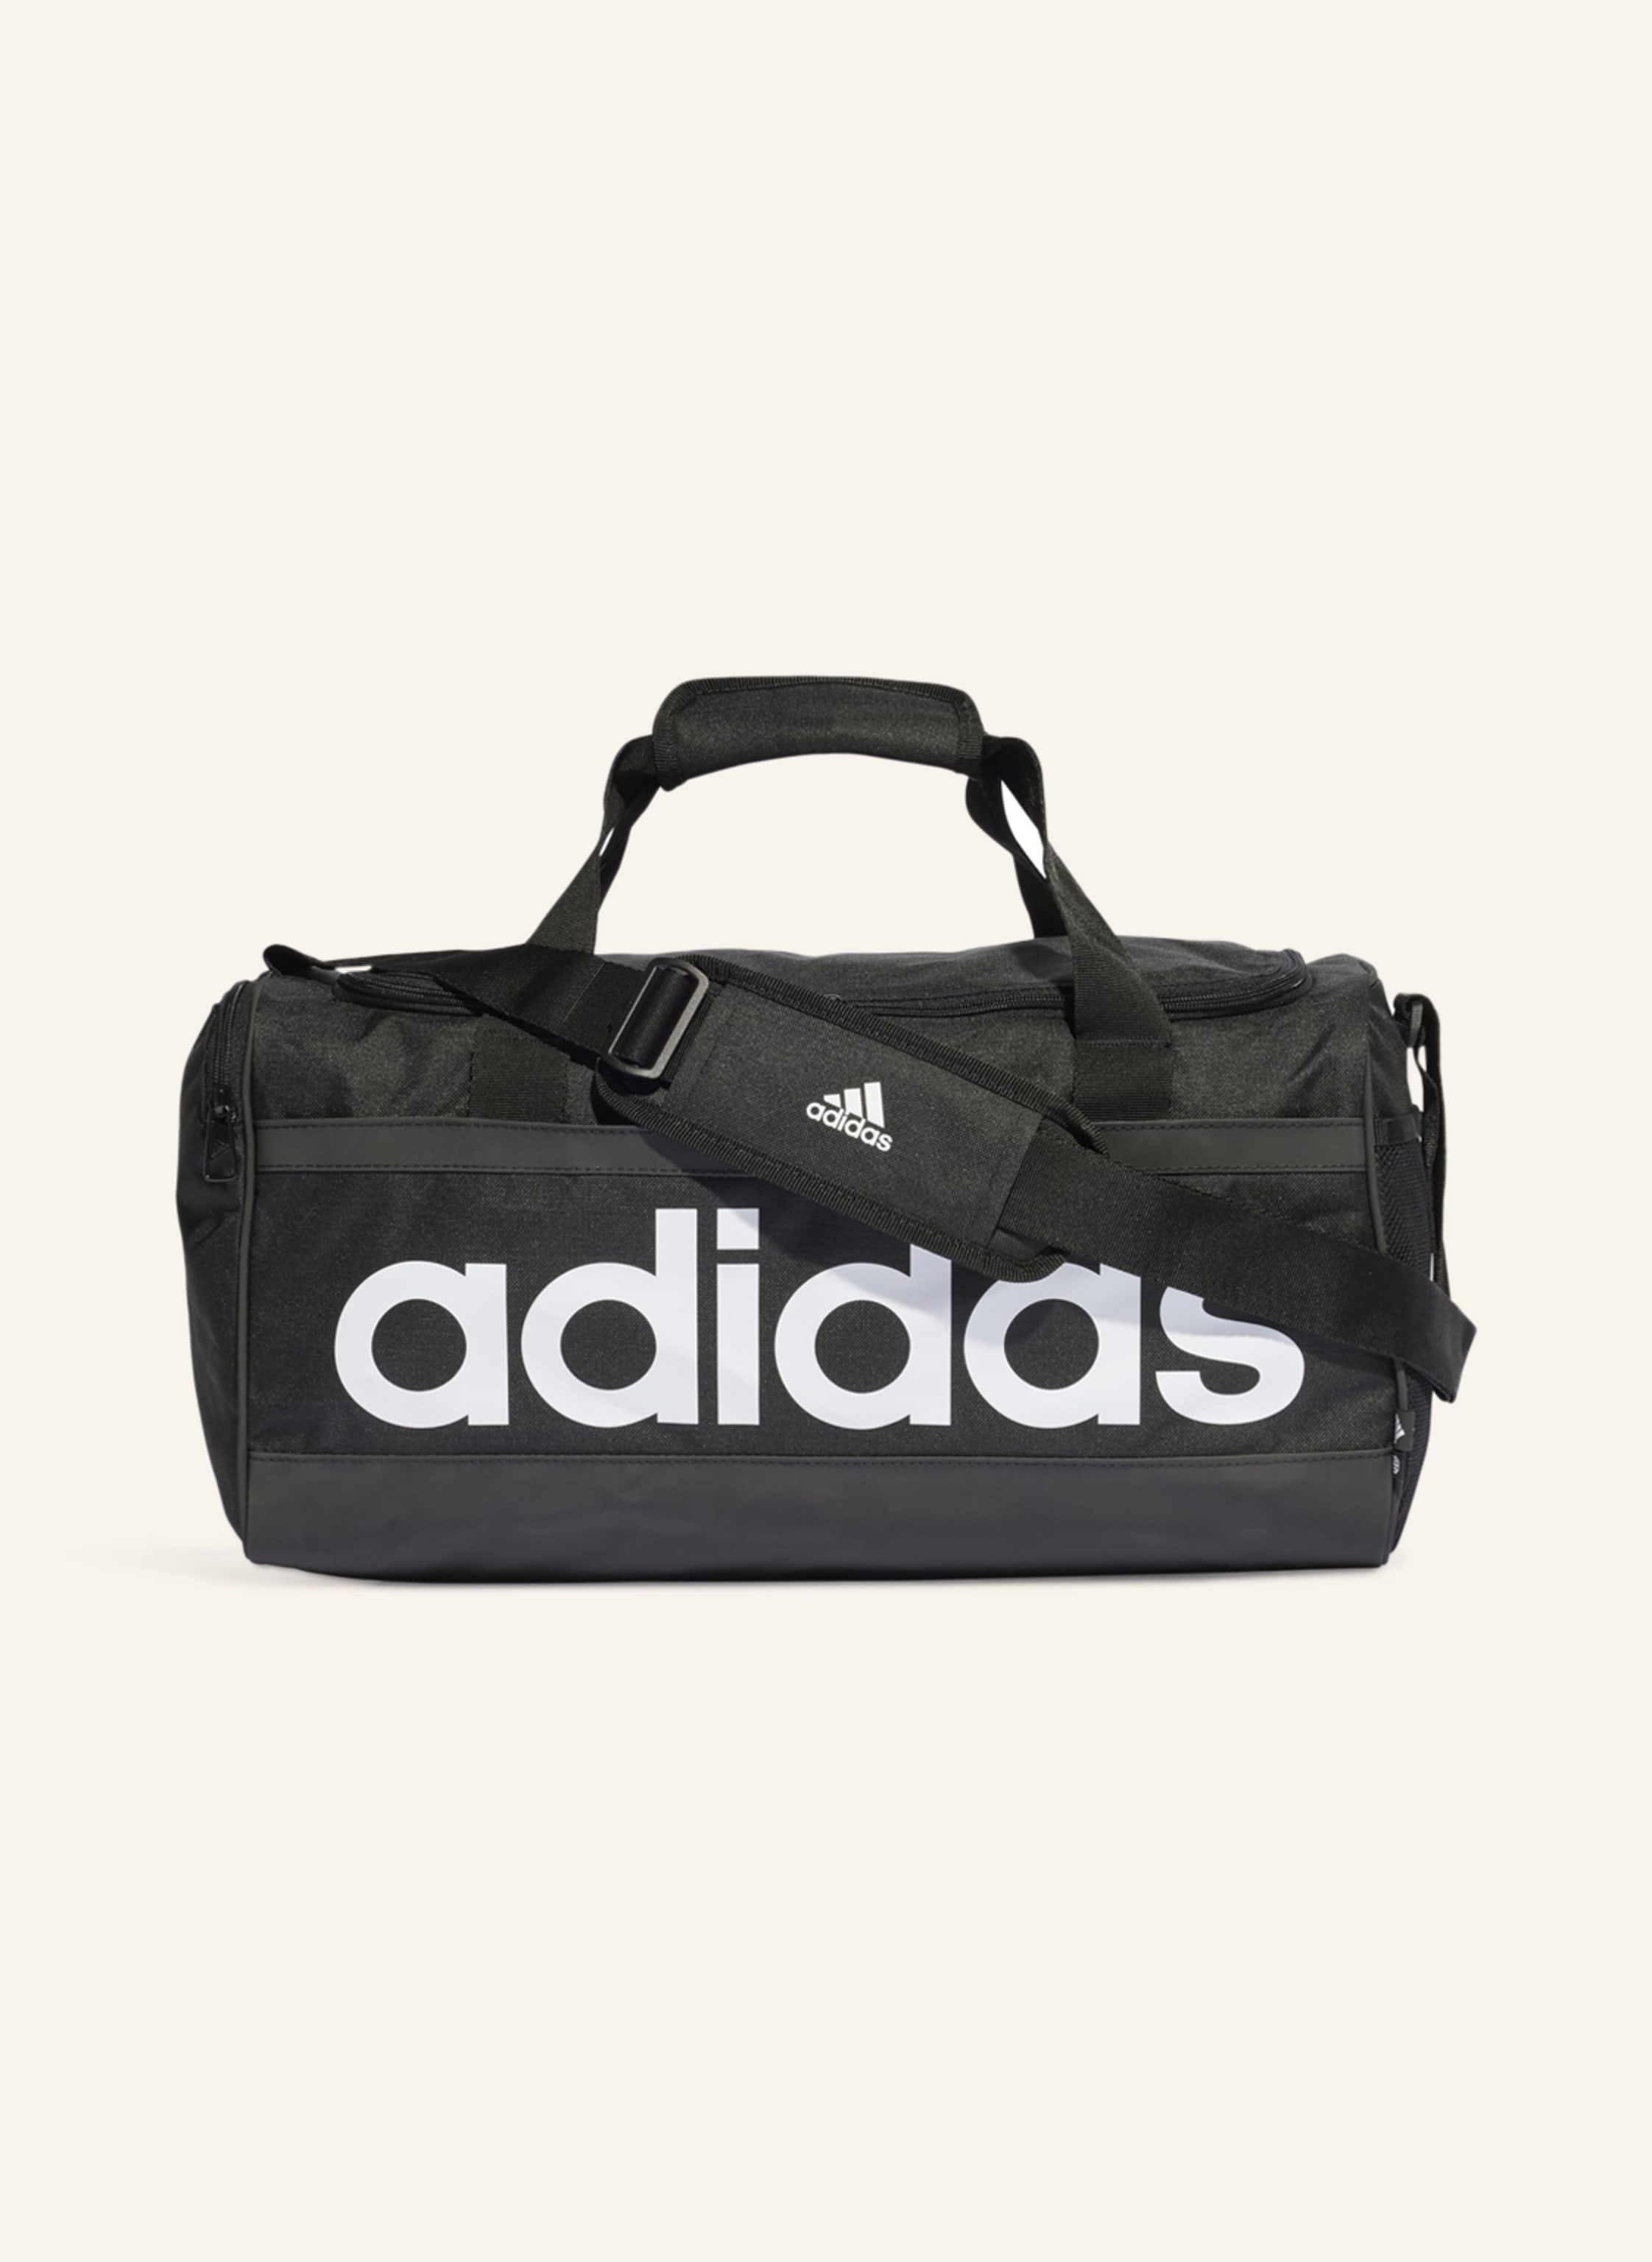 adidas Sports Bags. Find adidas Backpacks, Bum Bags | Bags for Gym, Stock,  Offers | Arvind Sport, adidas samba rose platform boots black